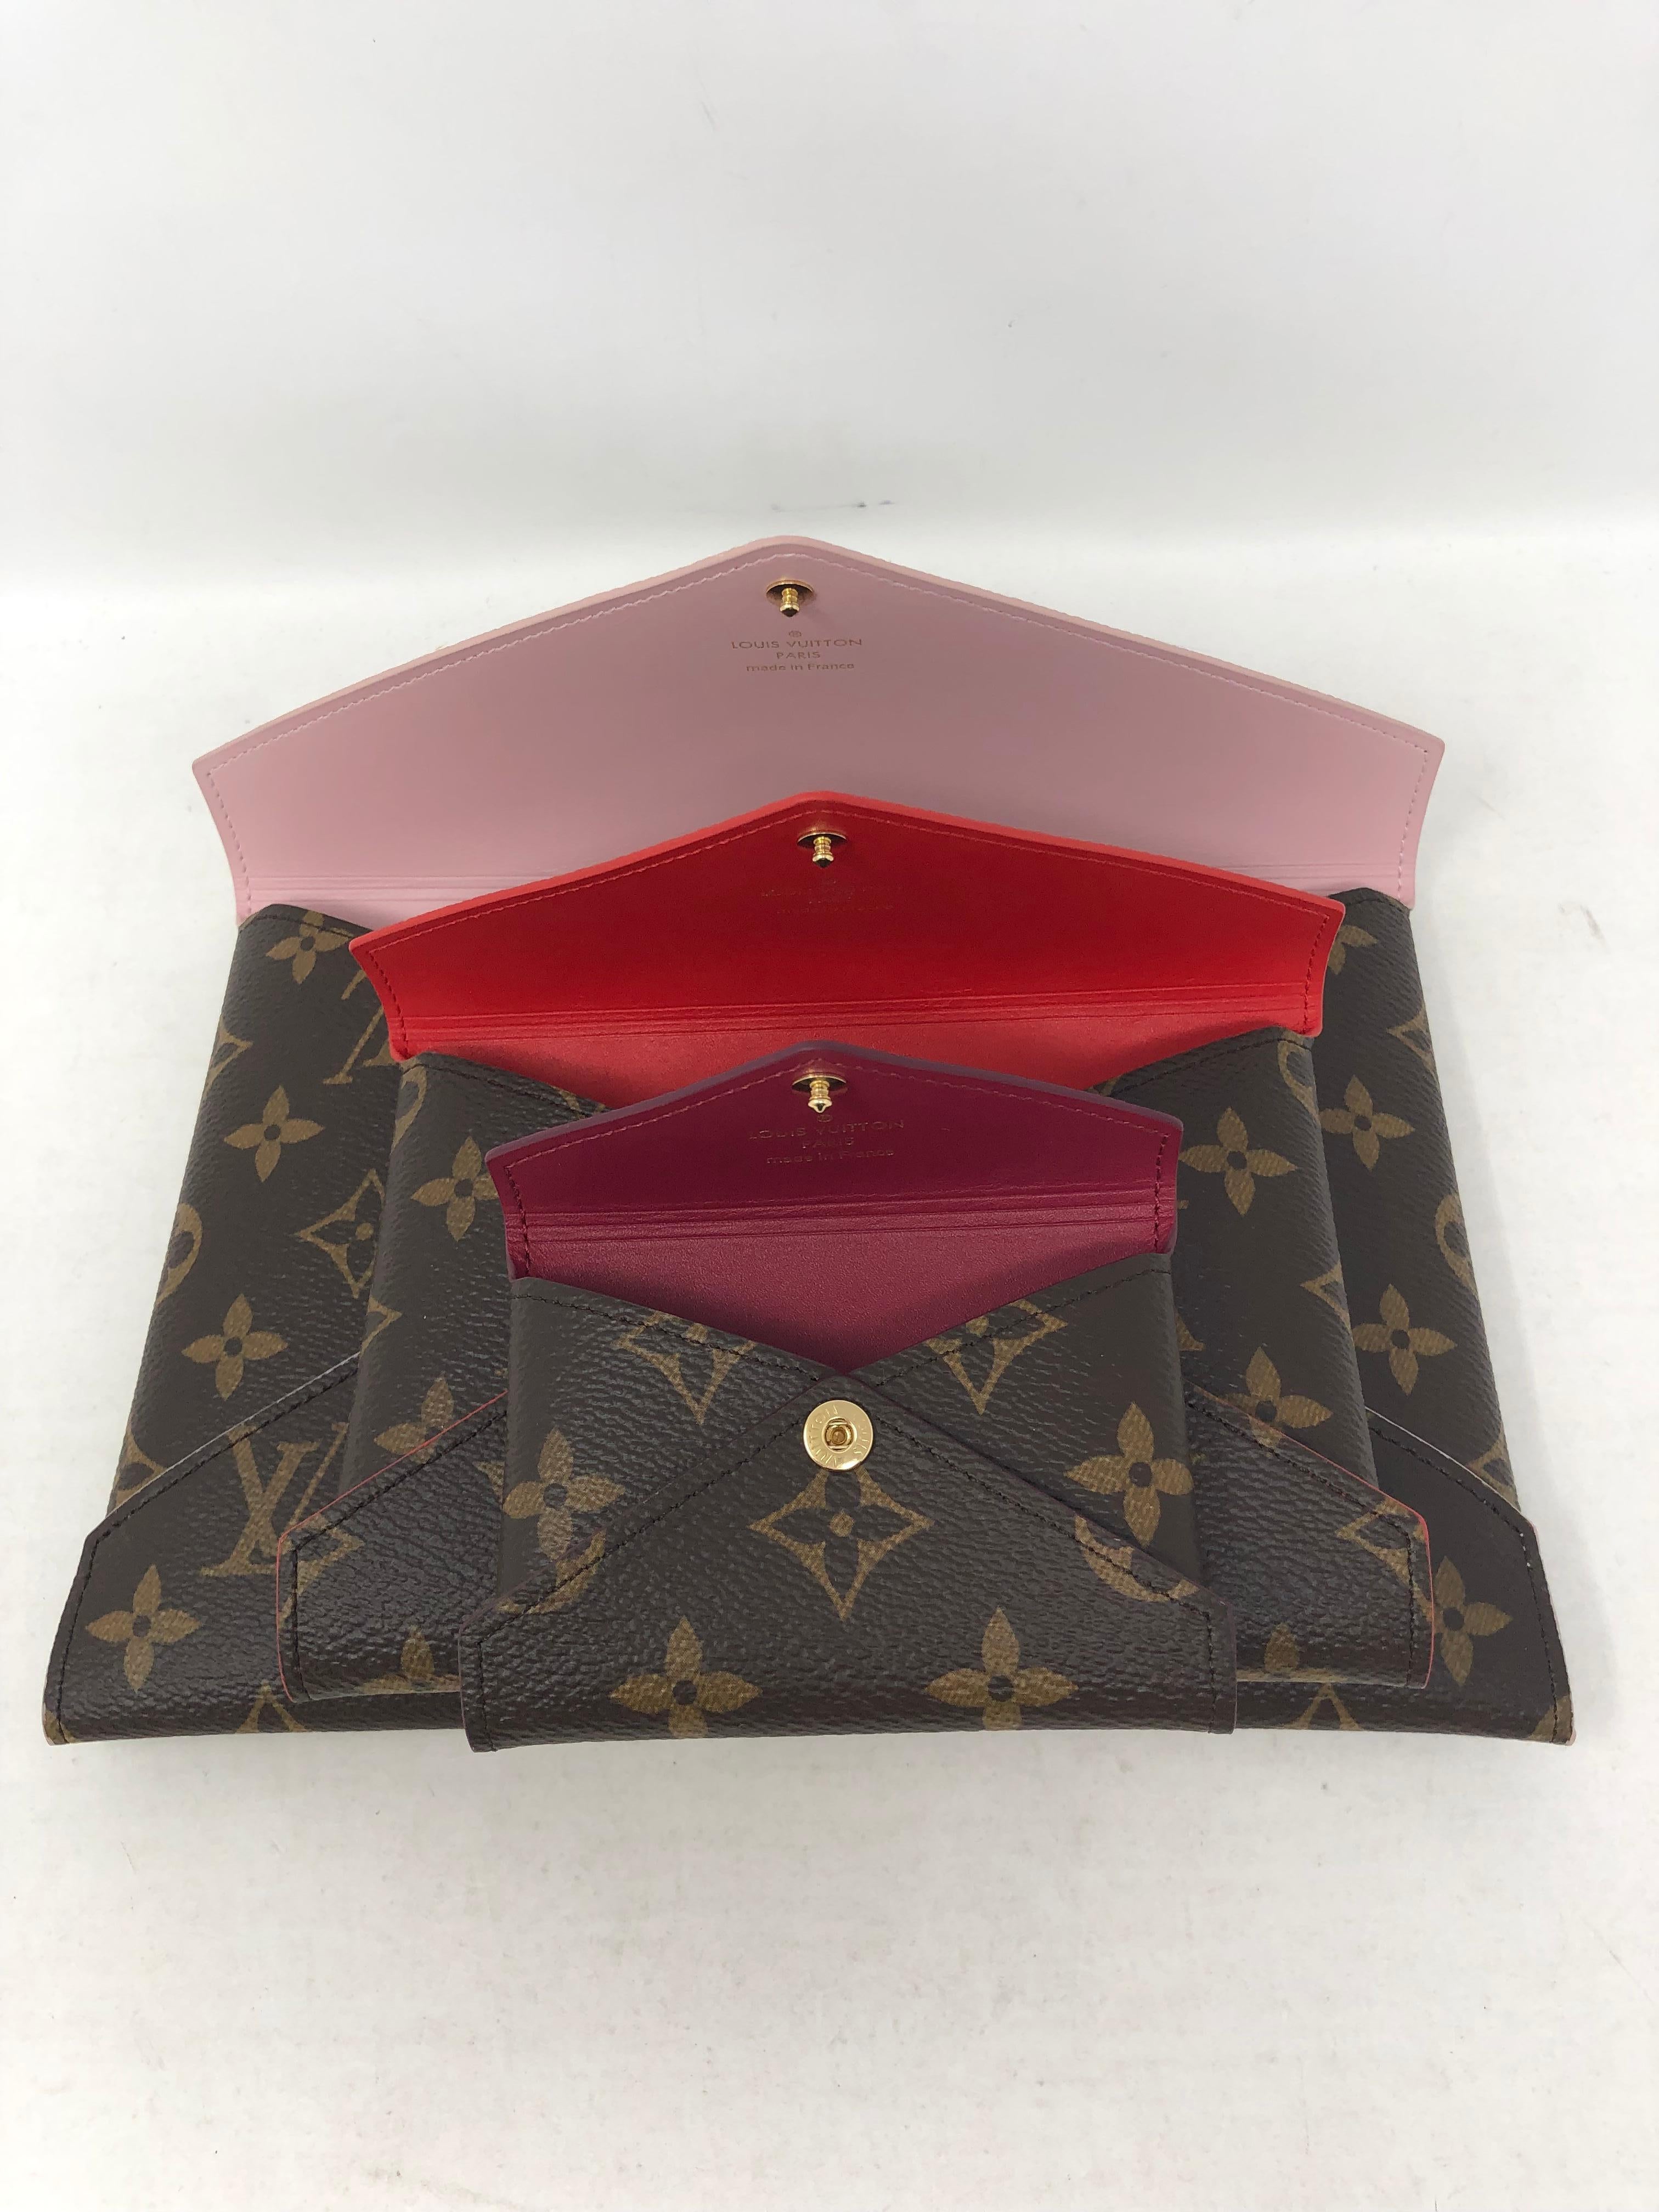 Louis Vuitton Pochette Kirigami set. Three envelope style clutches that fit together like a Russian nesting doll. Pink, red and purple interior. Brand new. Includes dust cover and box. Guaranteed authentic. 